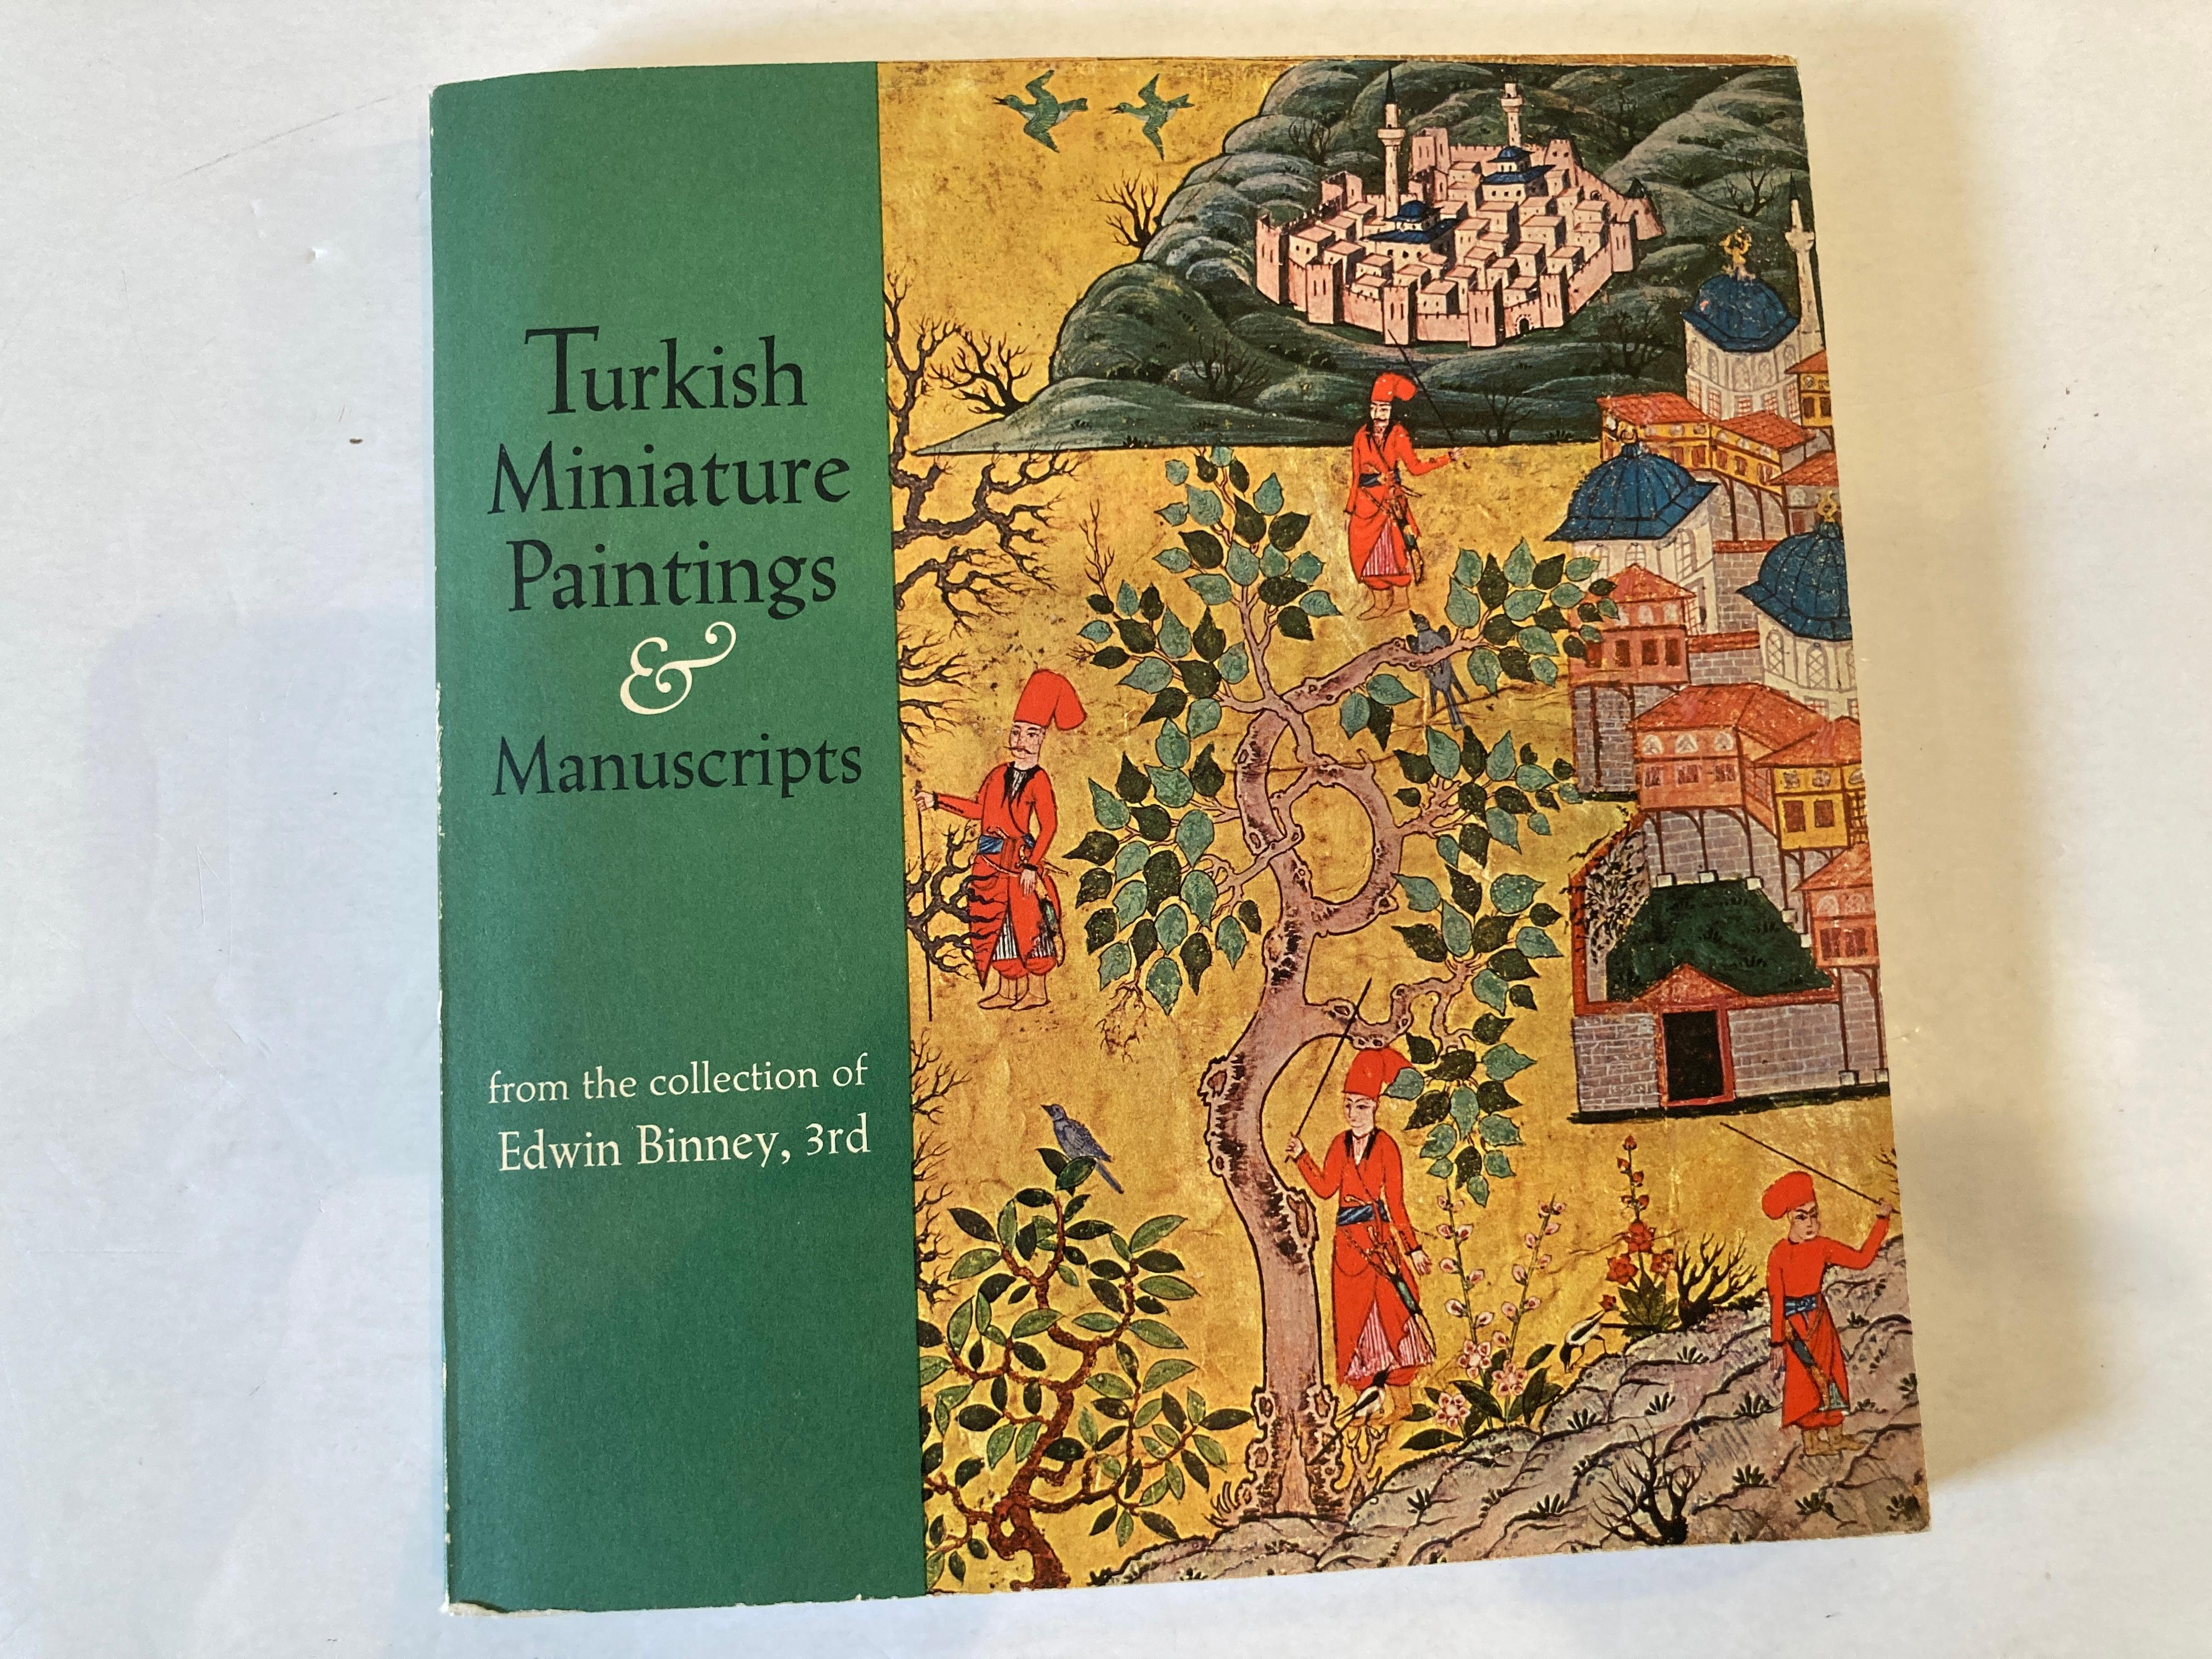 Turkish Miniature Paintings and Manuscripts from the Collection of Edwin Binney, 
Binney, Edwin (1973)
Examples of the Turkish pictorial arts outside the Topkapu Saray Library in Istanbul are rare—a well-known fact that Dr. Binney demonstrates